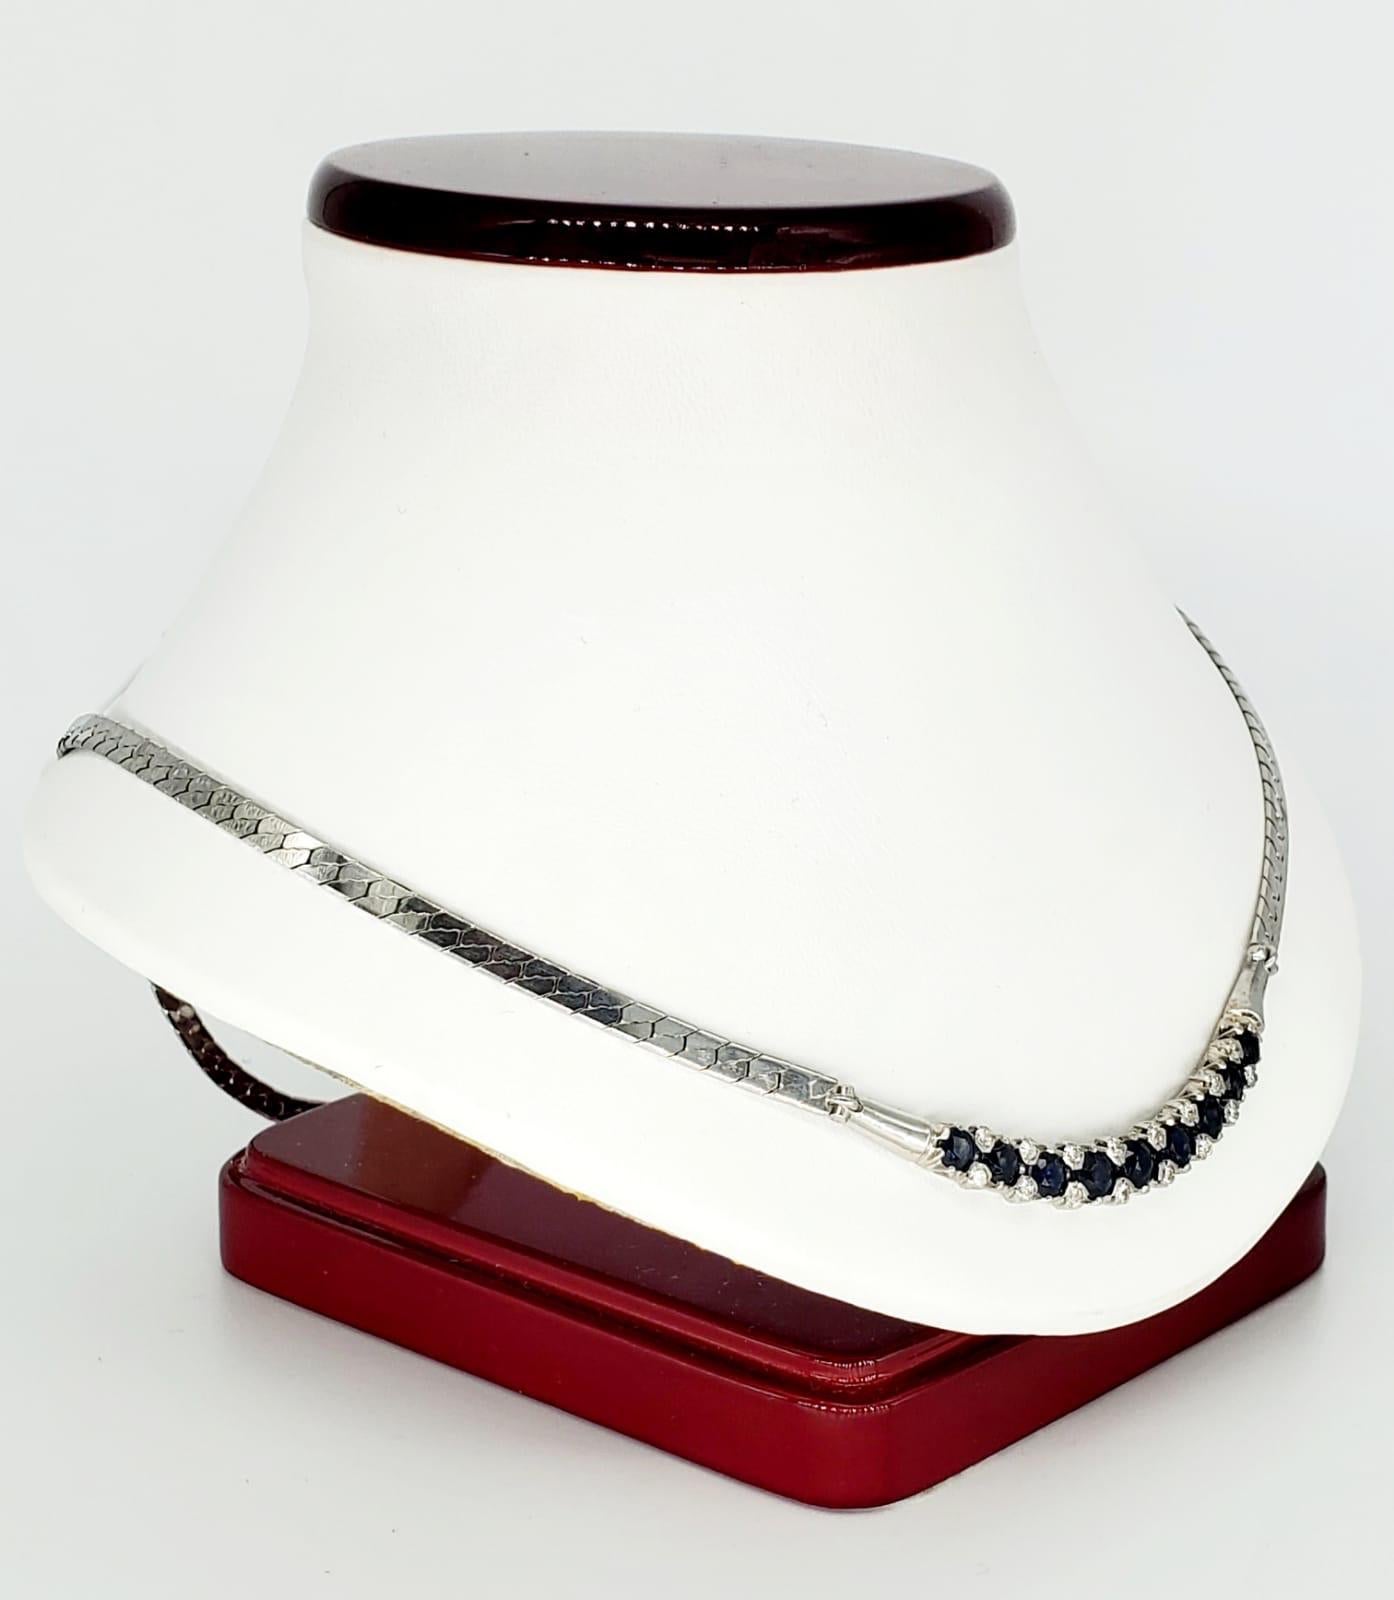 Vintage 4.32 Carat Diamonds & Blue Sapphires Necklace. The sapphires are natural and weight approx 4 carat and the diamond are SI clarity totaling approx 0.32 carats with a total of 16 diamonds. The necklace sparkles and has it’s on beauty that